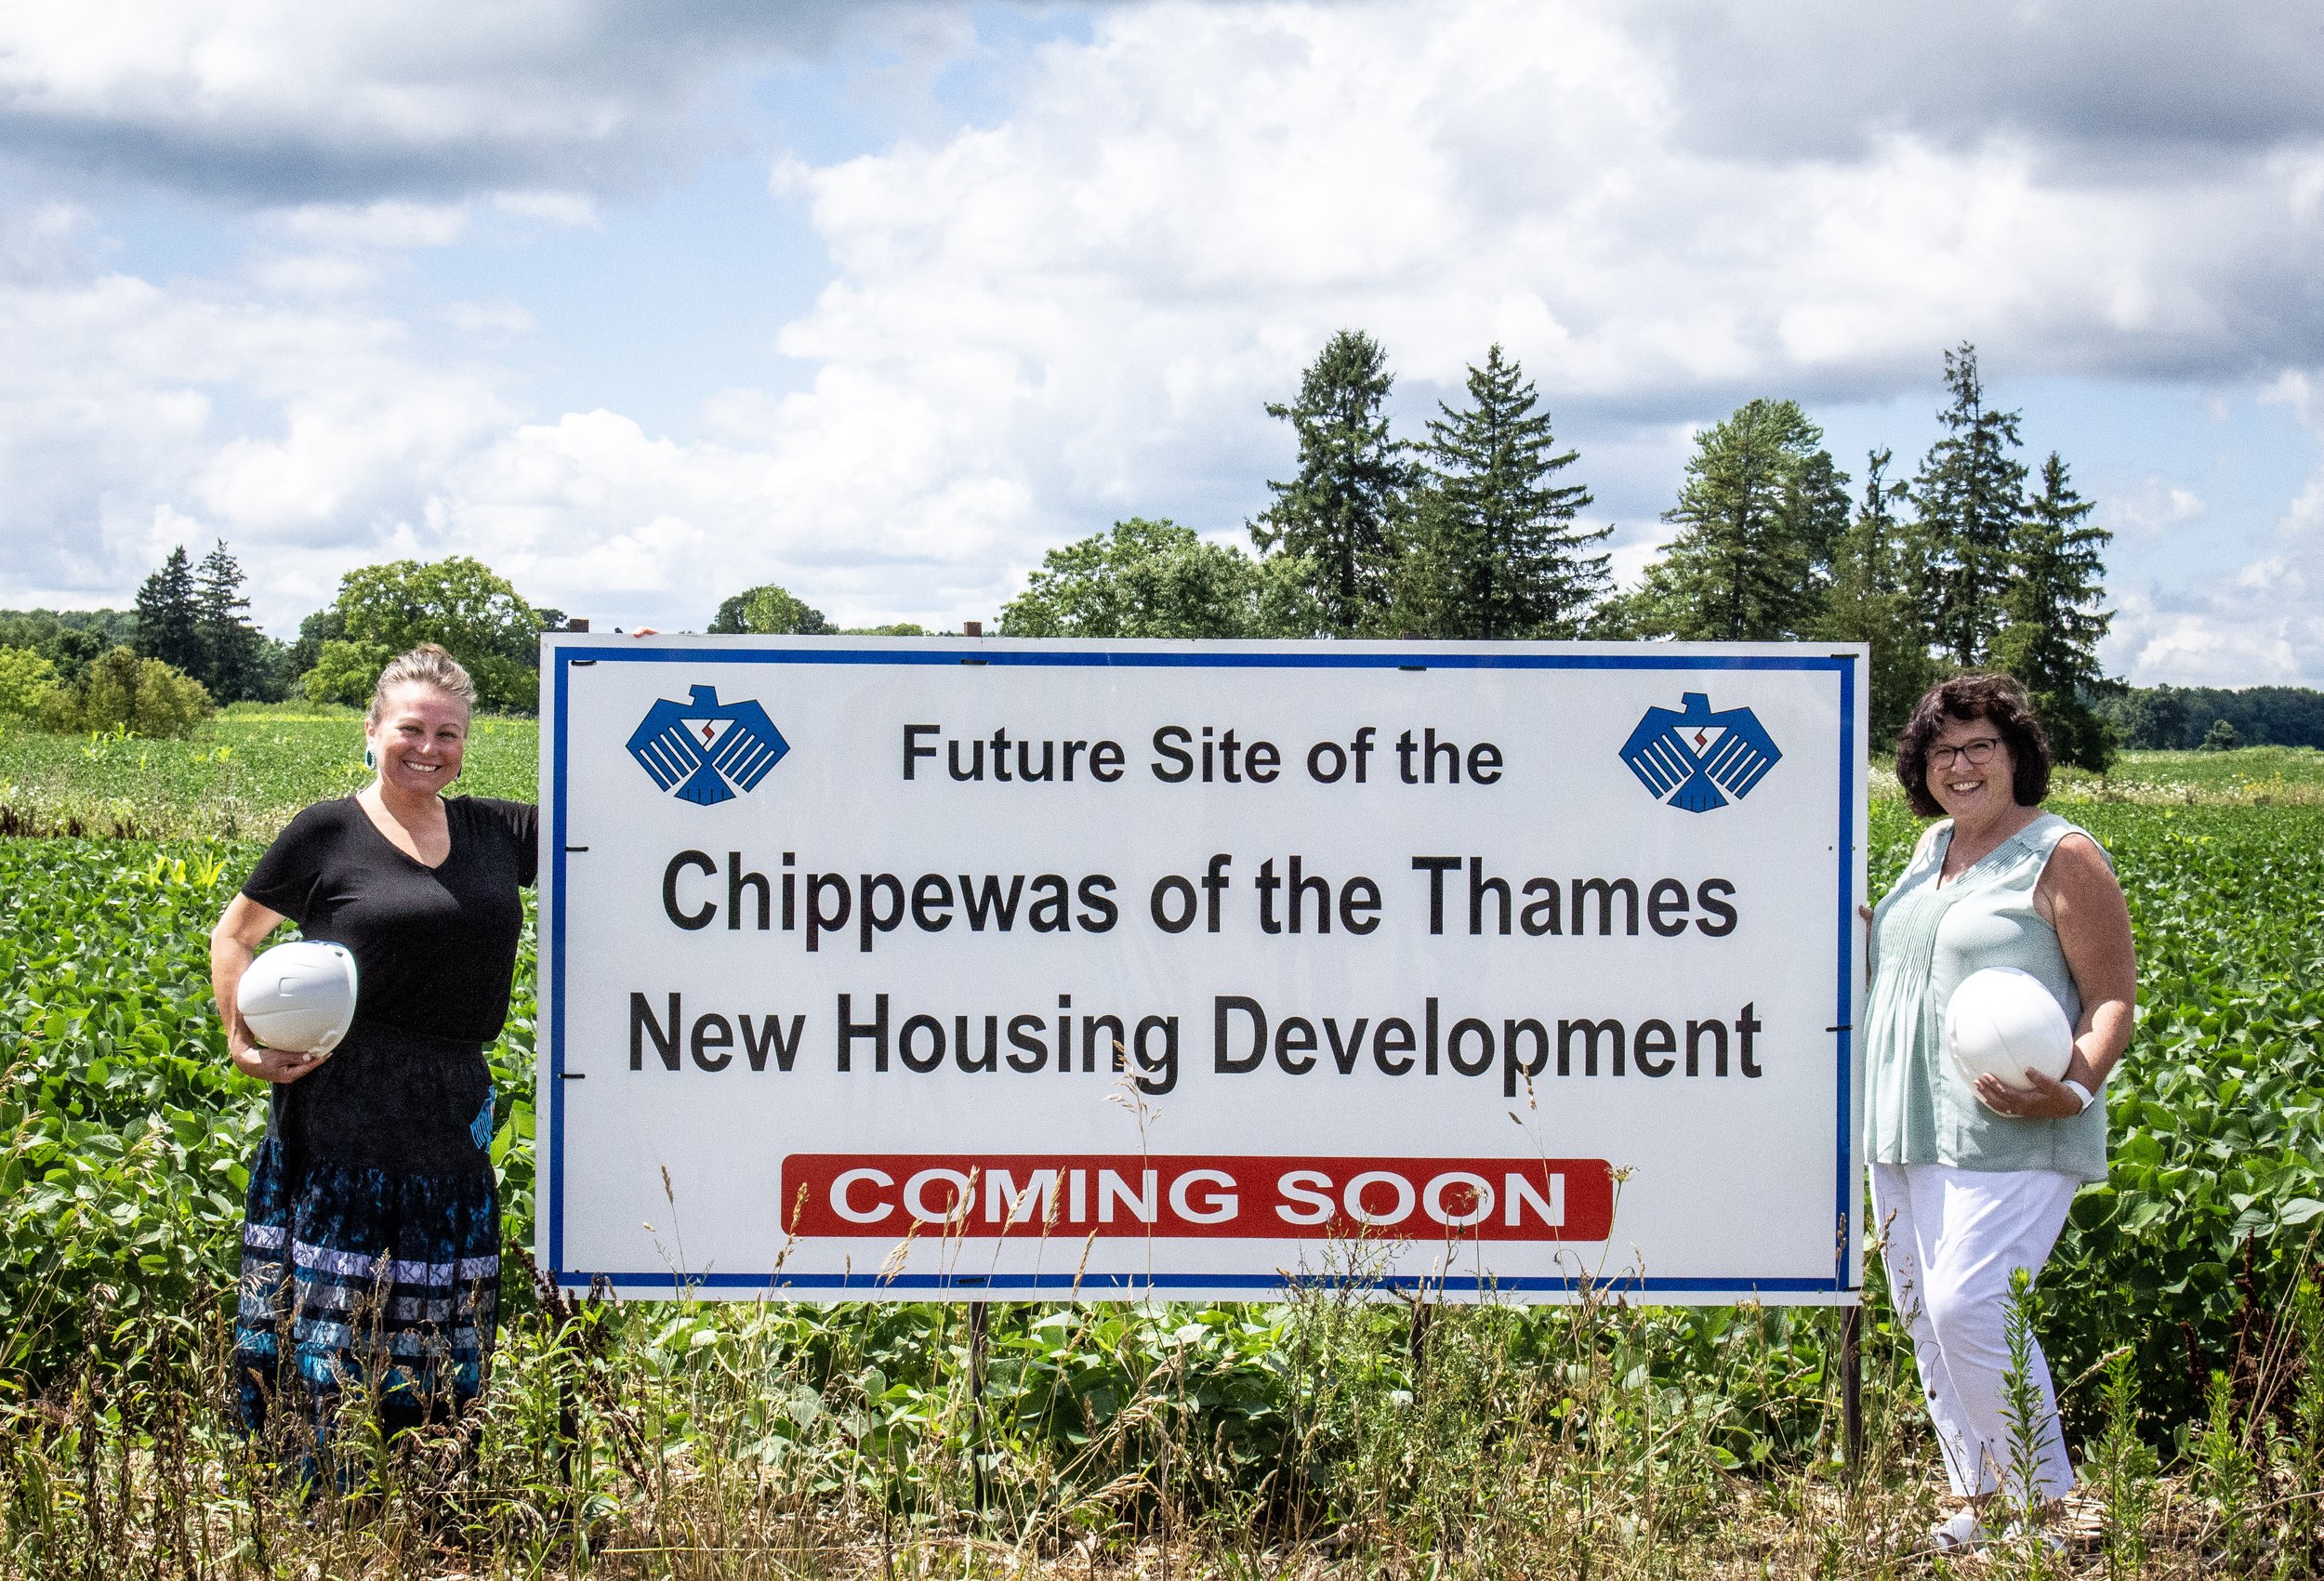 Pathways Employment Health Centre and Chippewas of the Thames First Nation